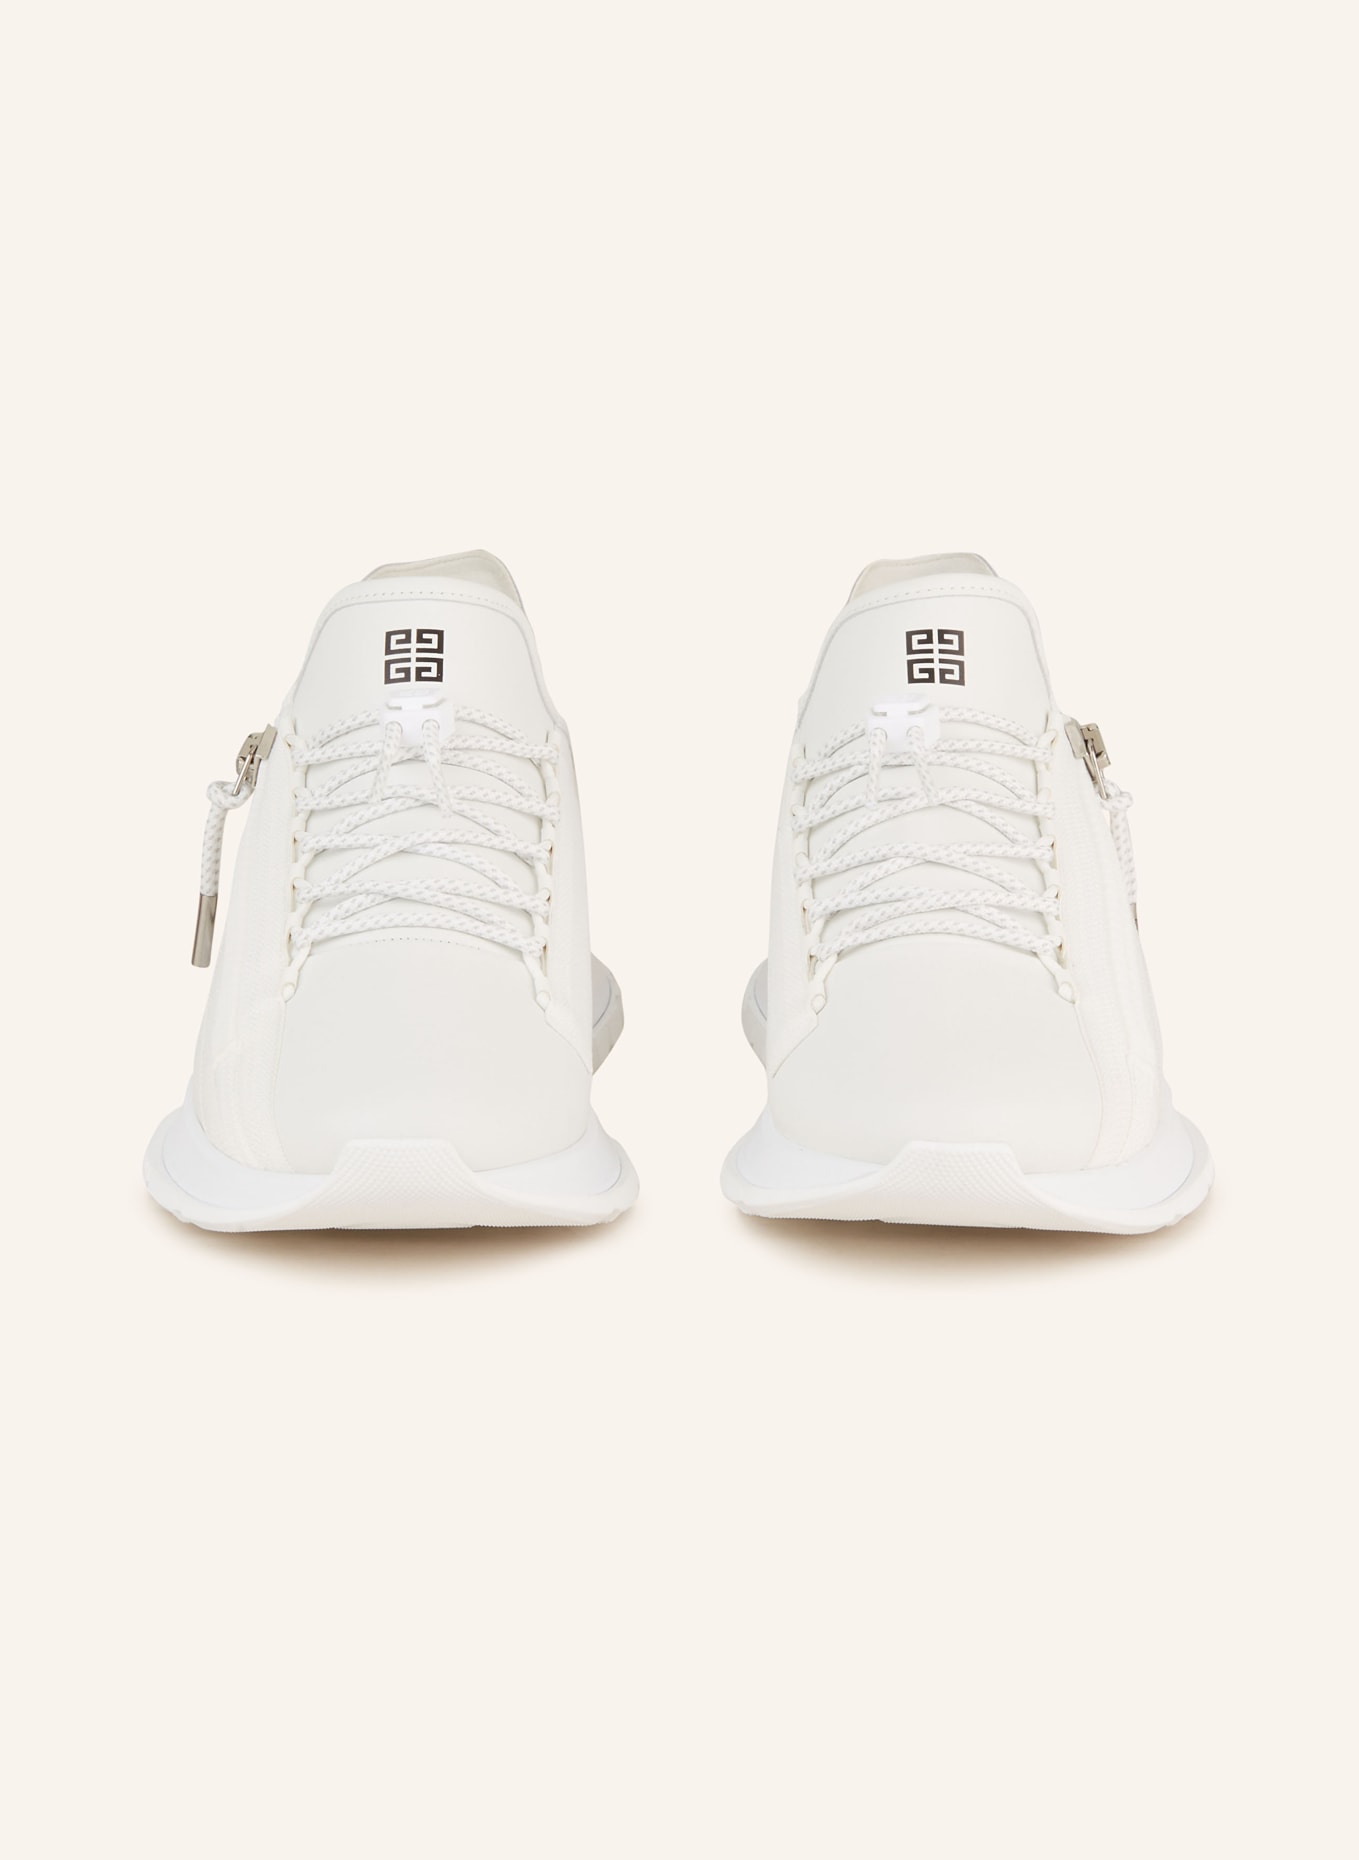 GIVENCHY Sneaker SPECTRE, Farbe: WEISS (Bild 3)